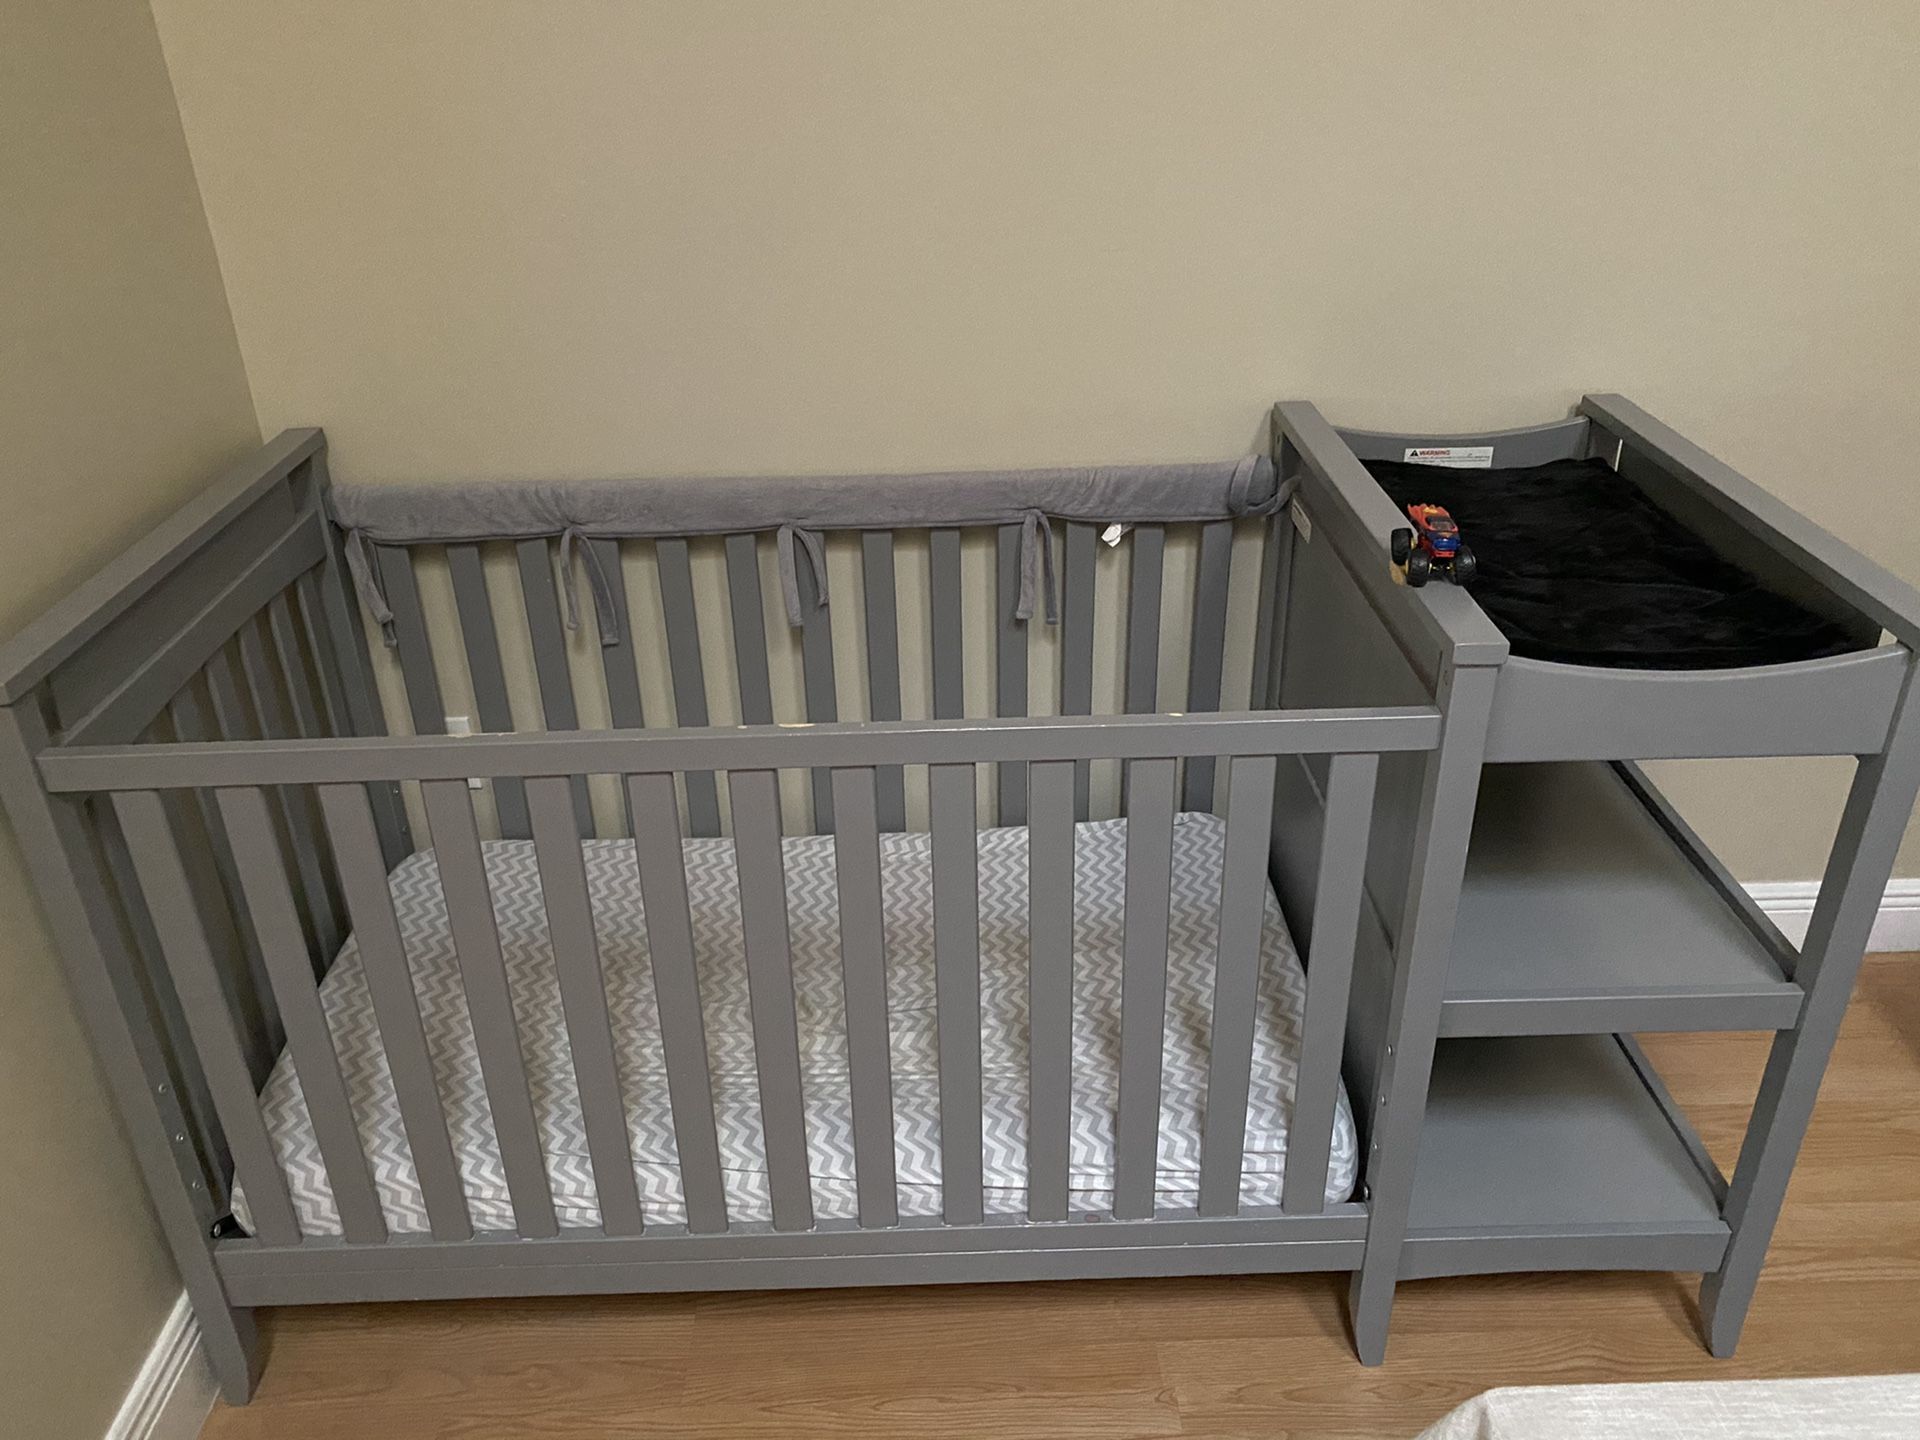 Crib and changing table combo for SALE / cuna de bebe con cambiador